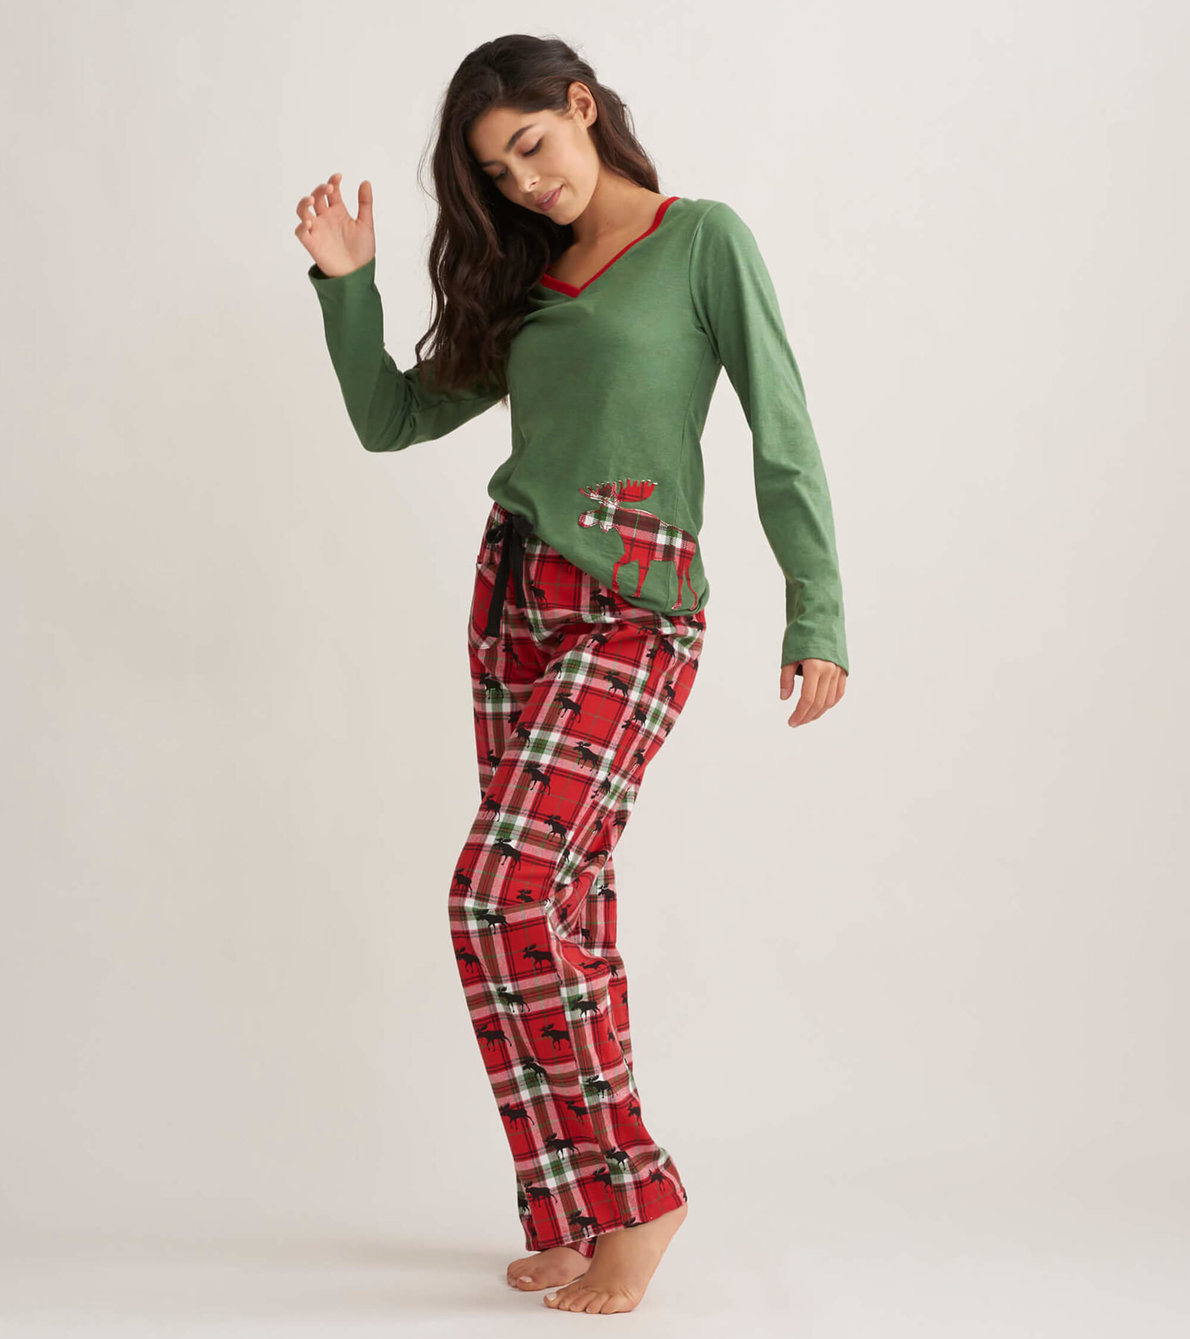 View larger image of Holiday Moose on Plaid Women's Tee and Pants Pajama Separates